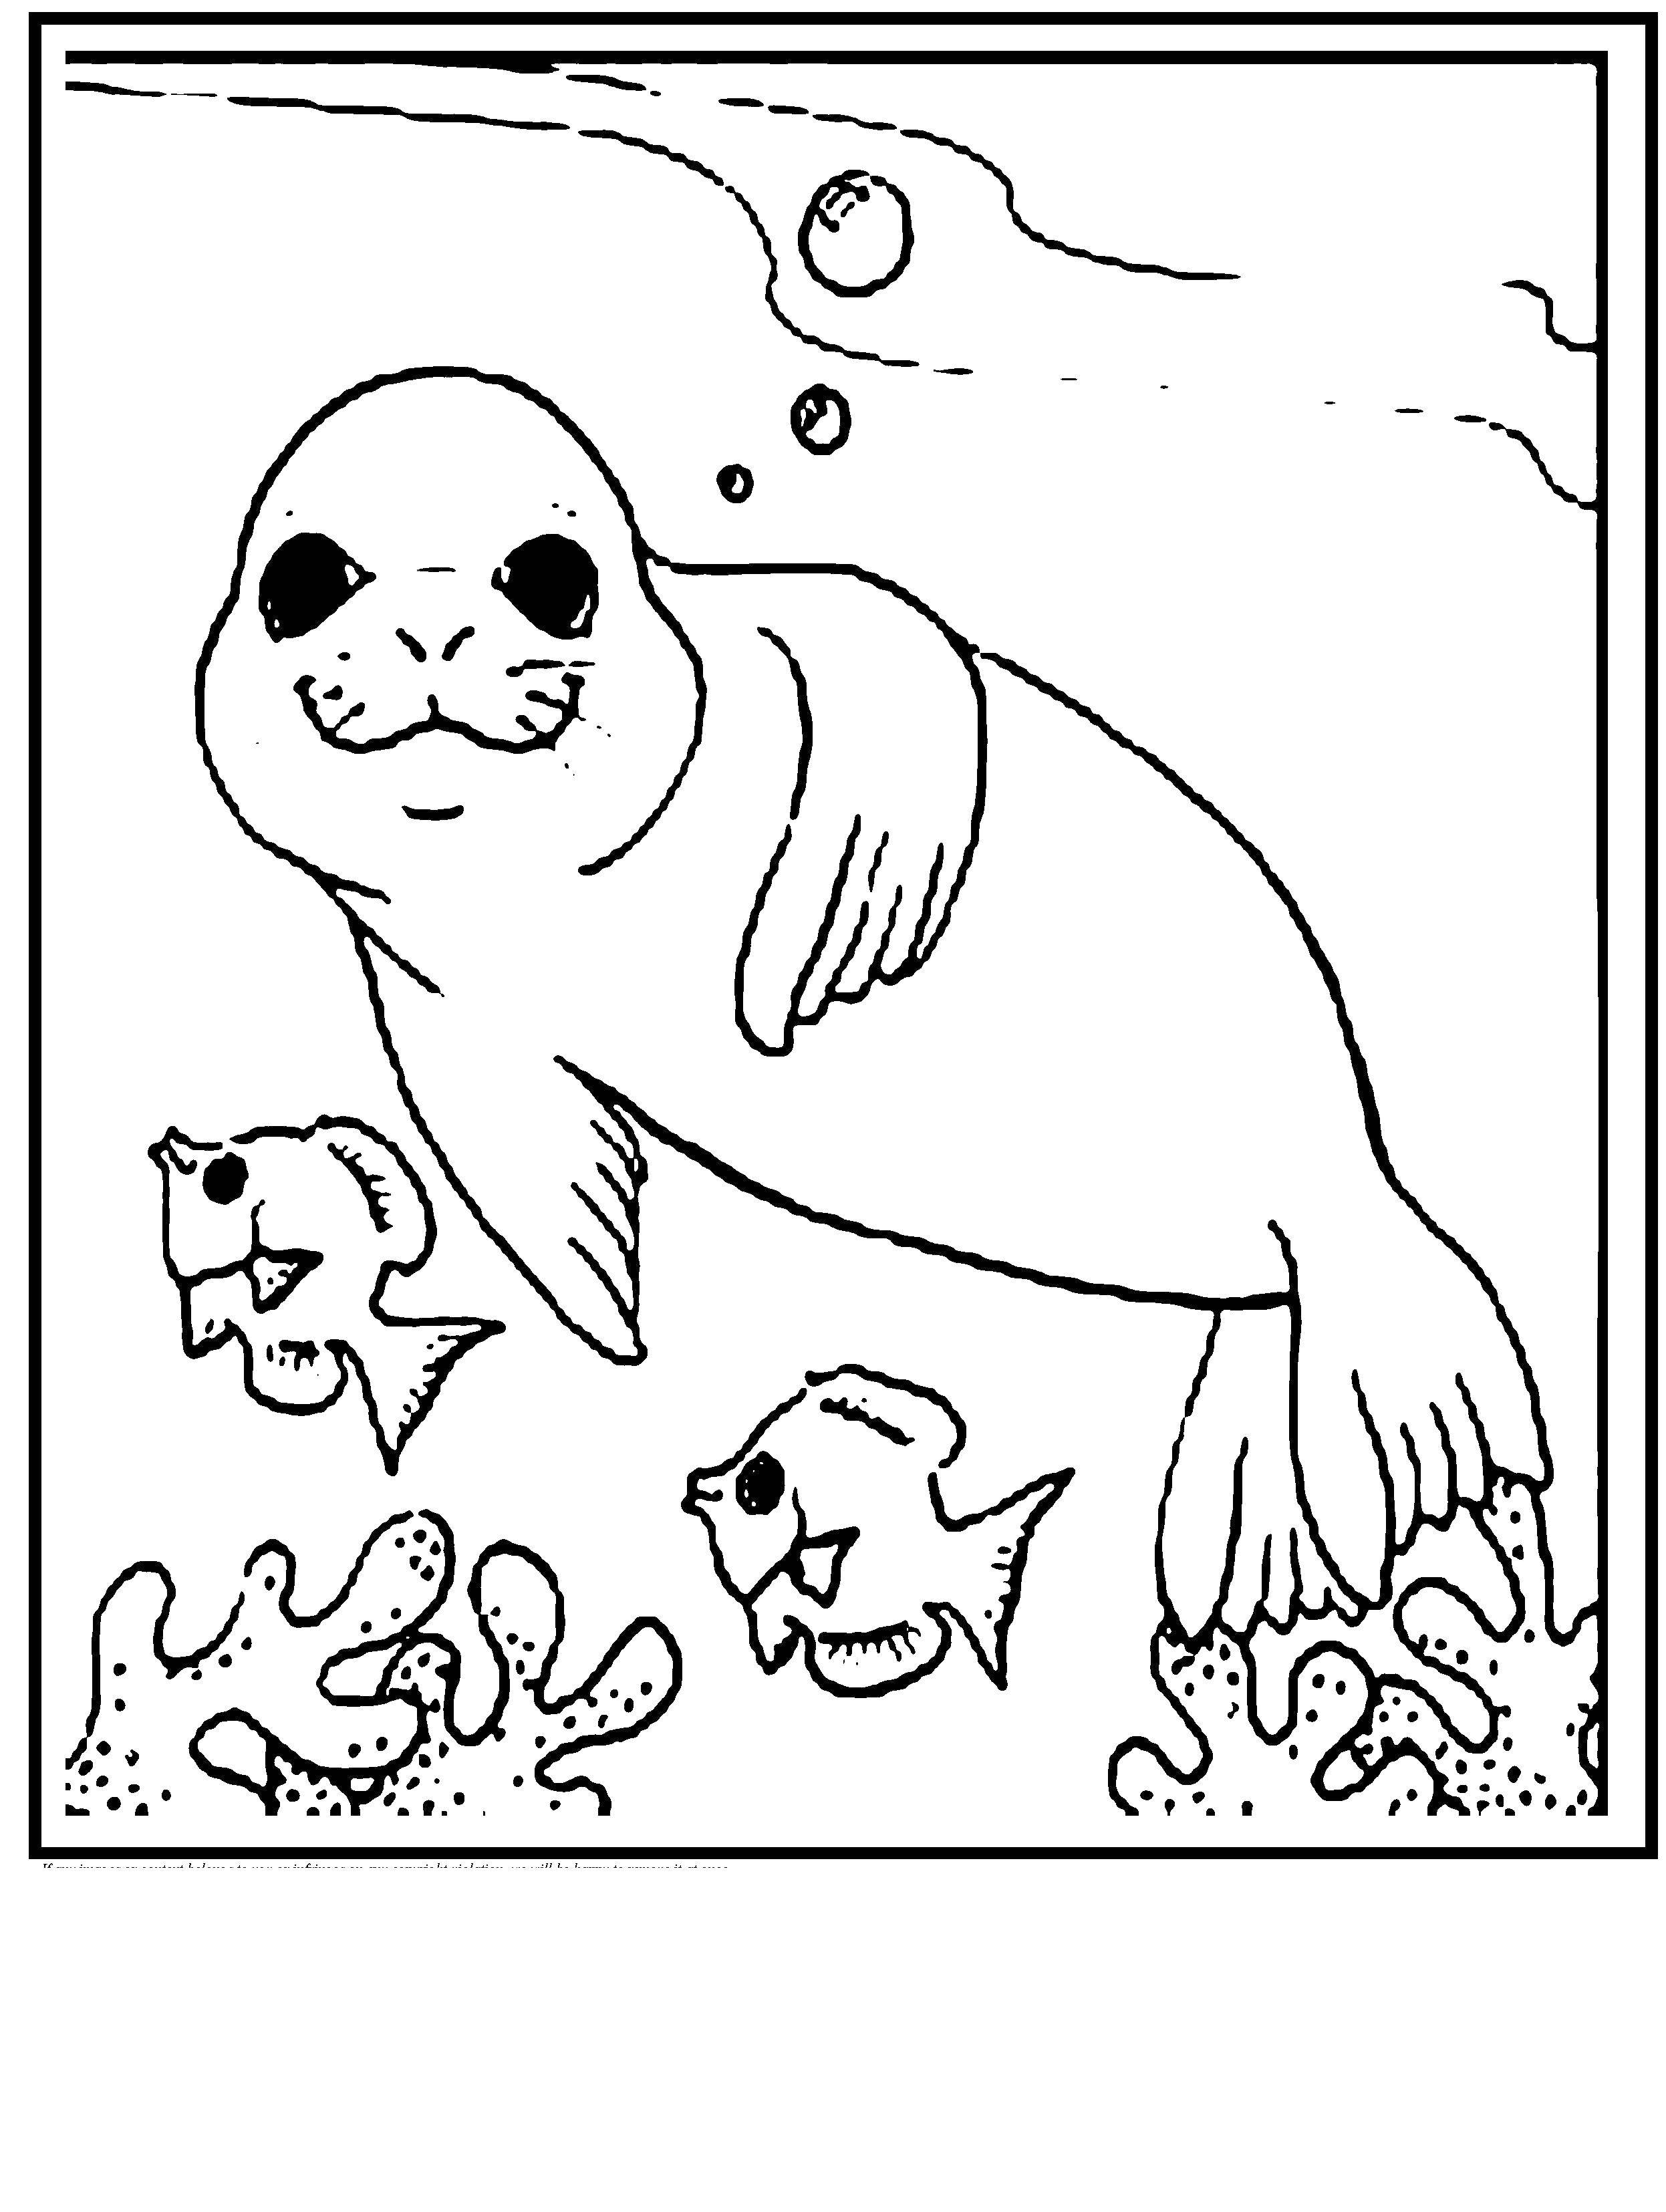 Coloring Seal. Category marine. Tags:  seals, walrus, lion.